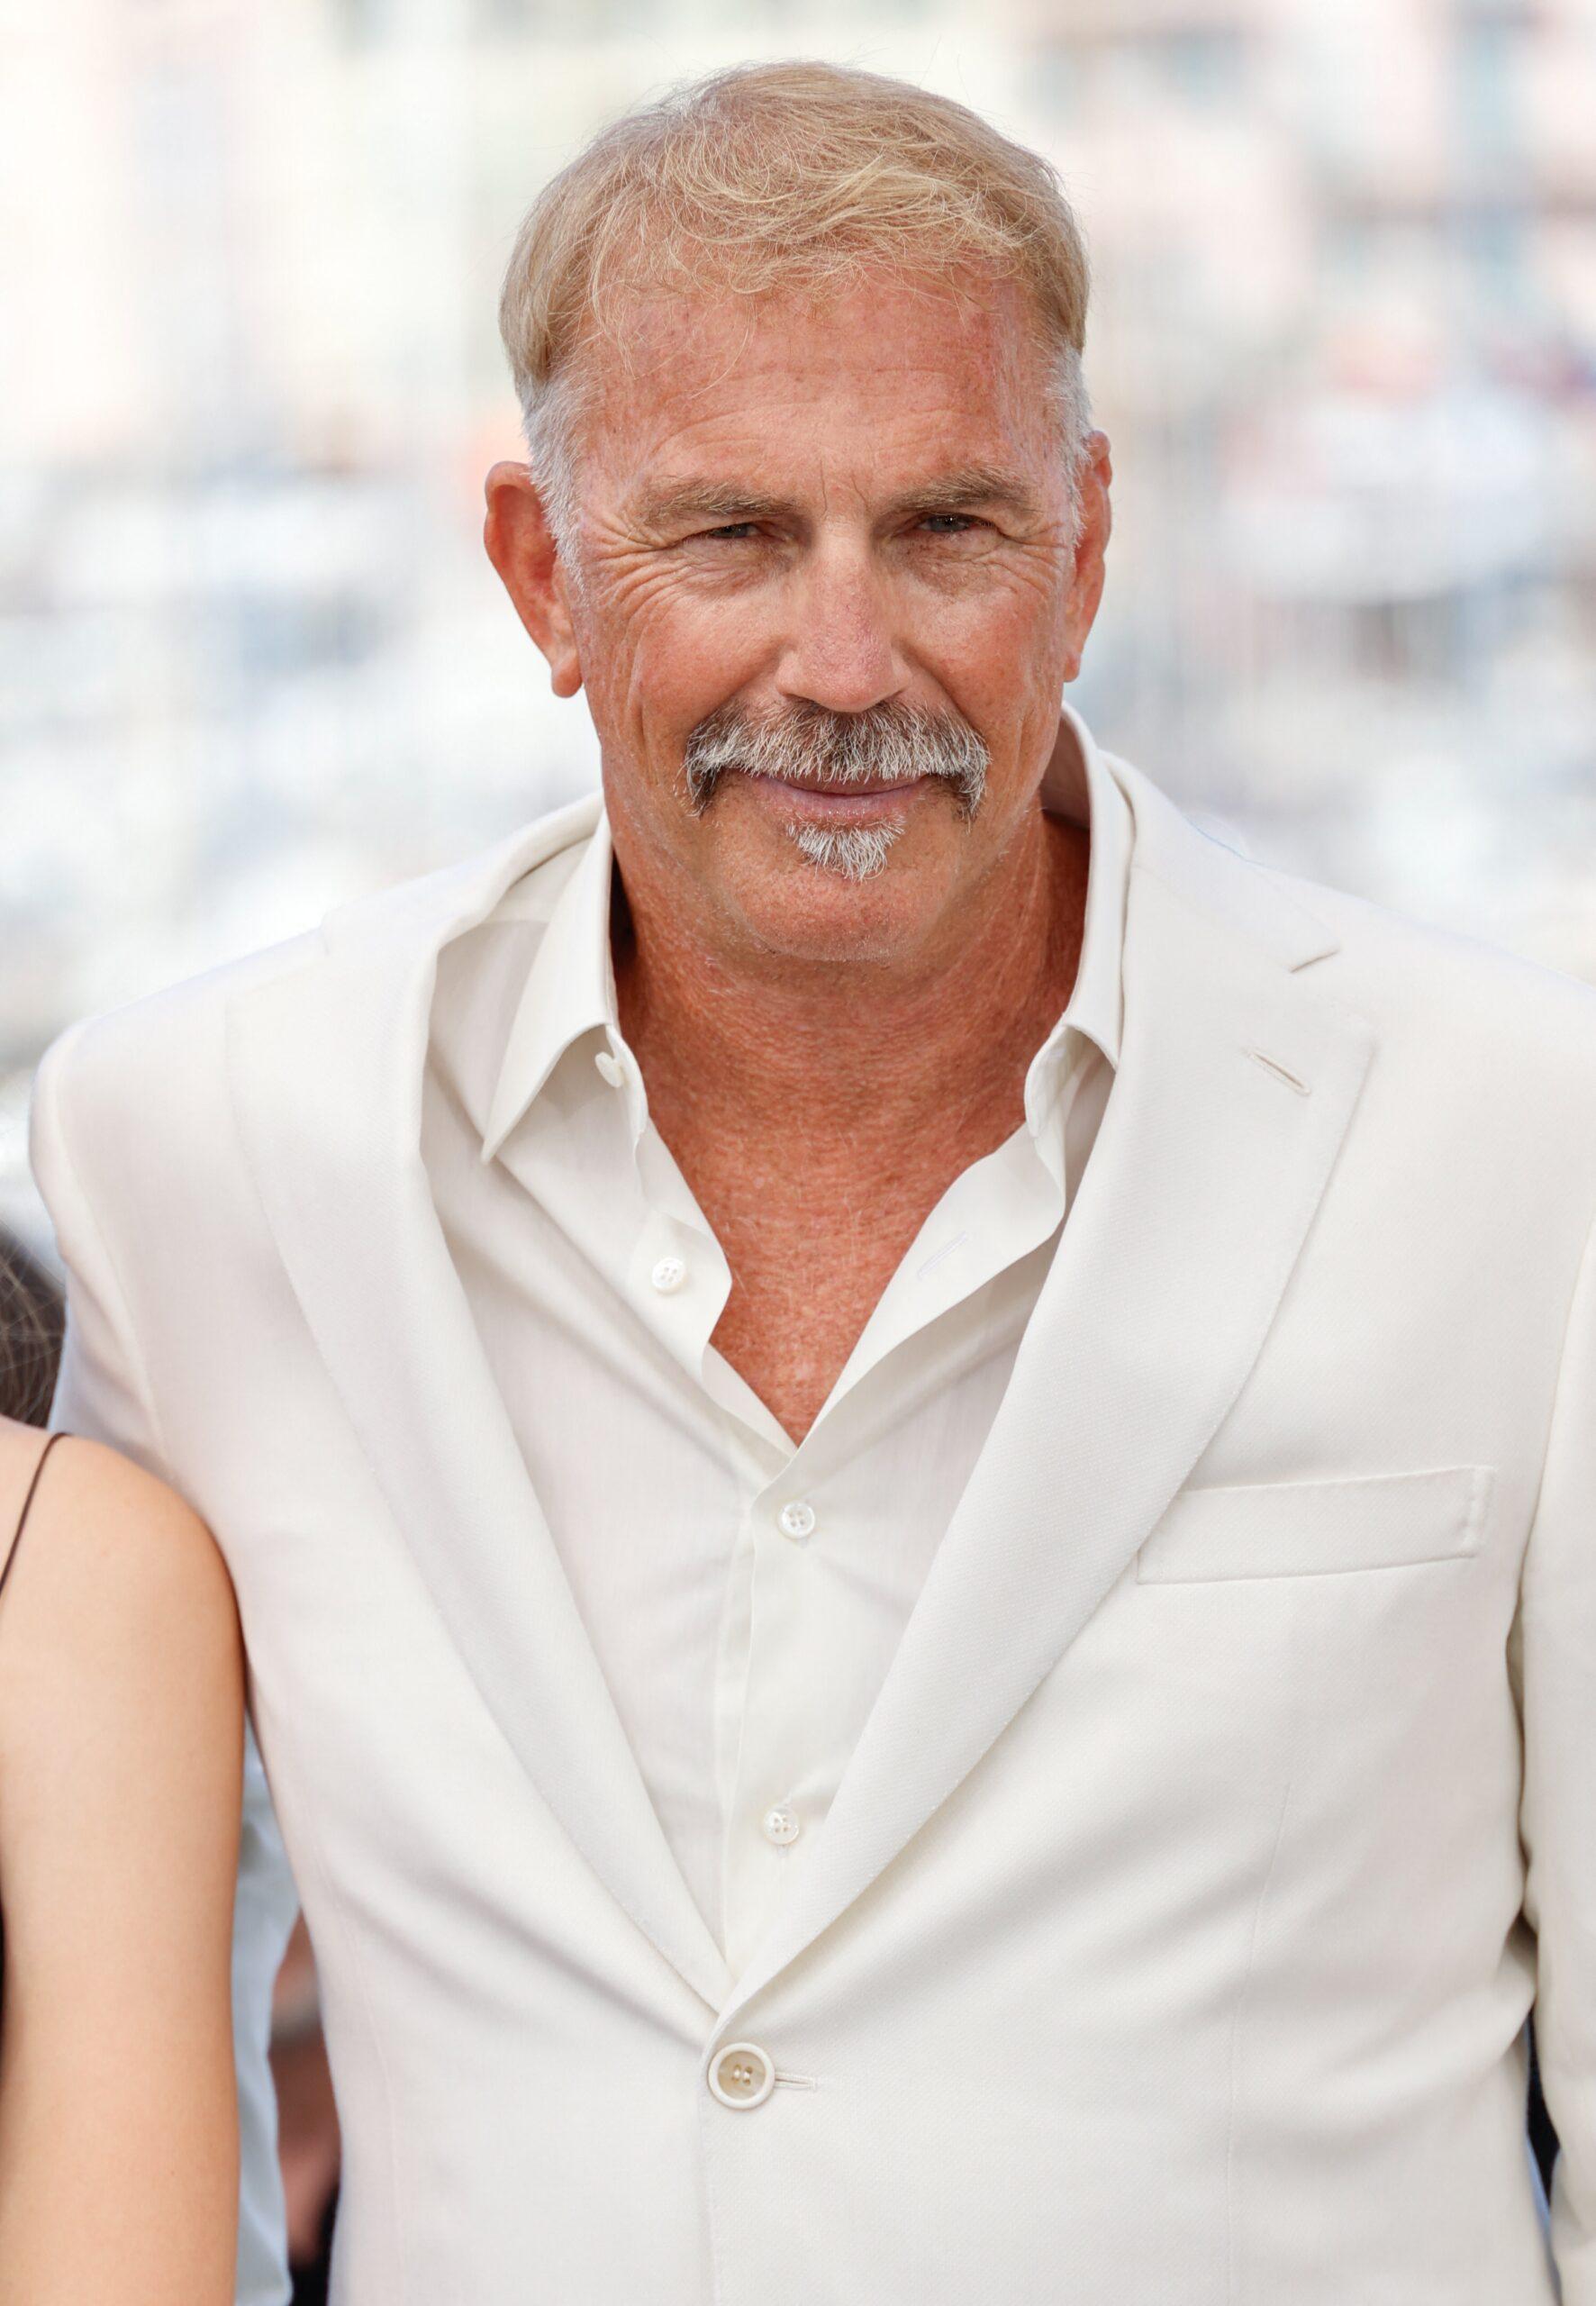 Kevin Costner attends "Horizon: An American Saga" Photocall - The 77th Annual Cannes Film Festival